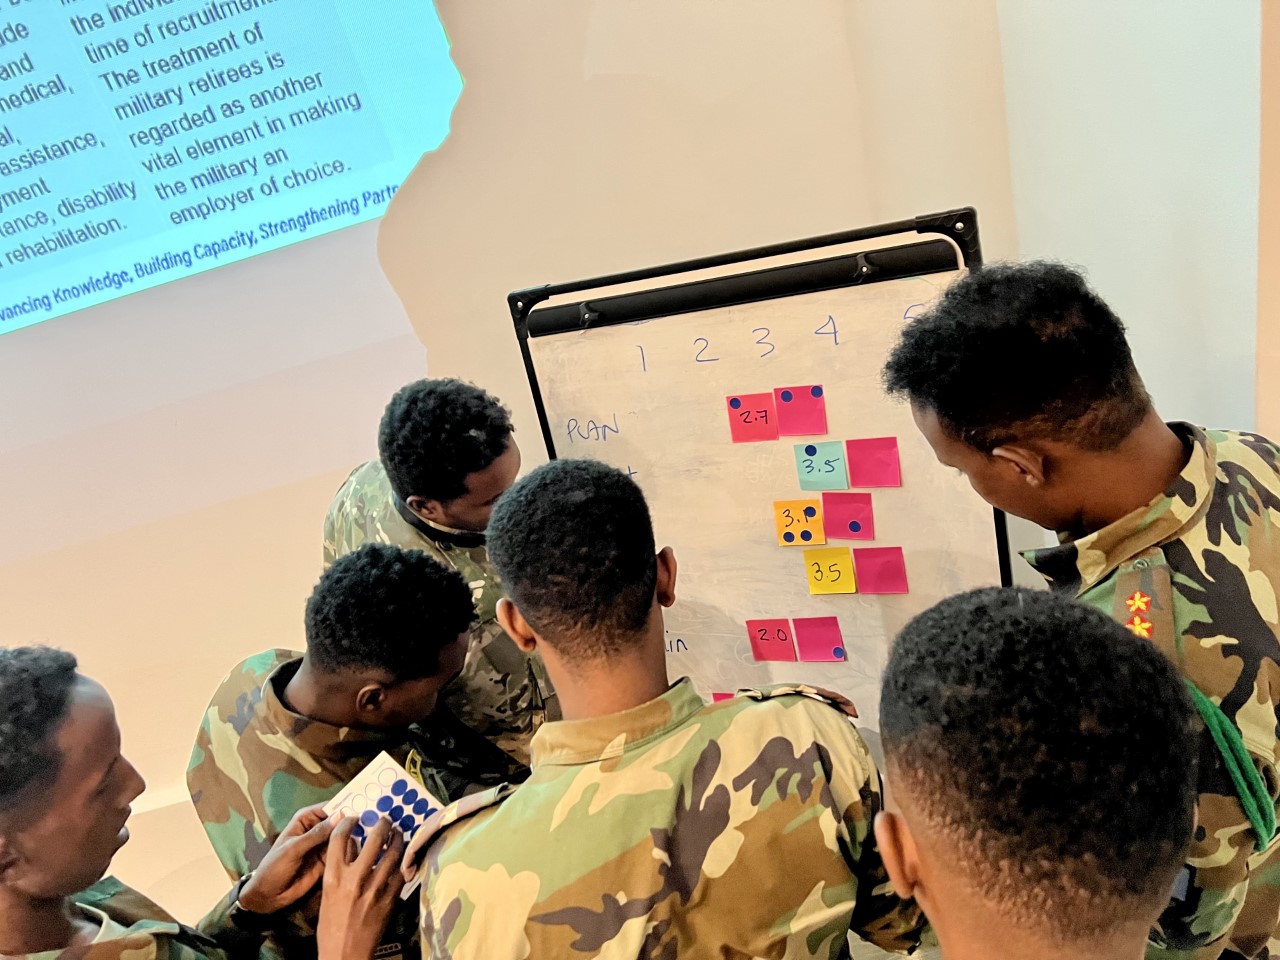 A group of soldiers collaborating on a whiteboard